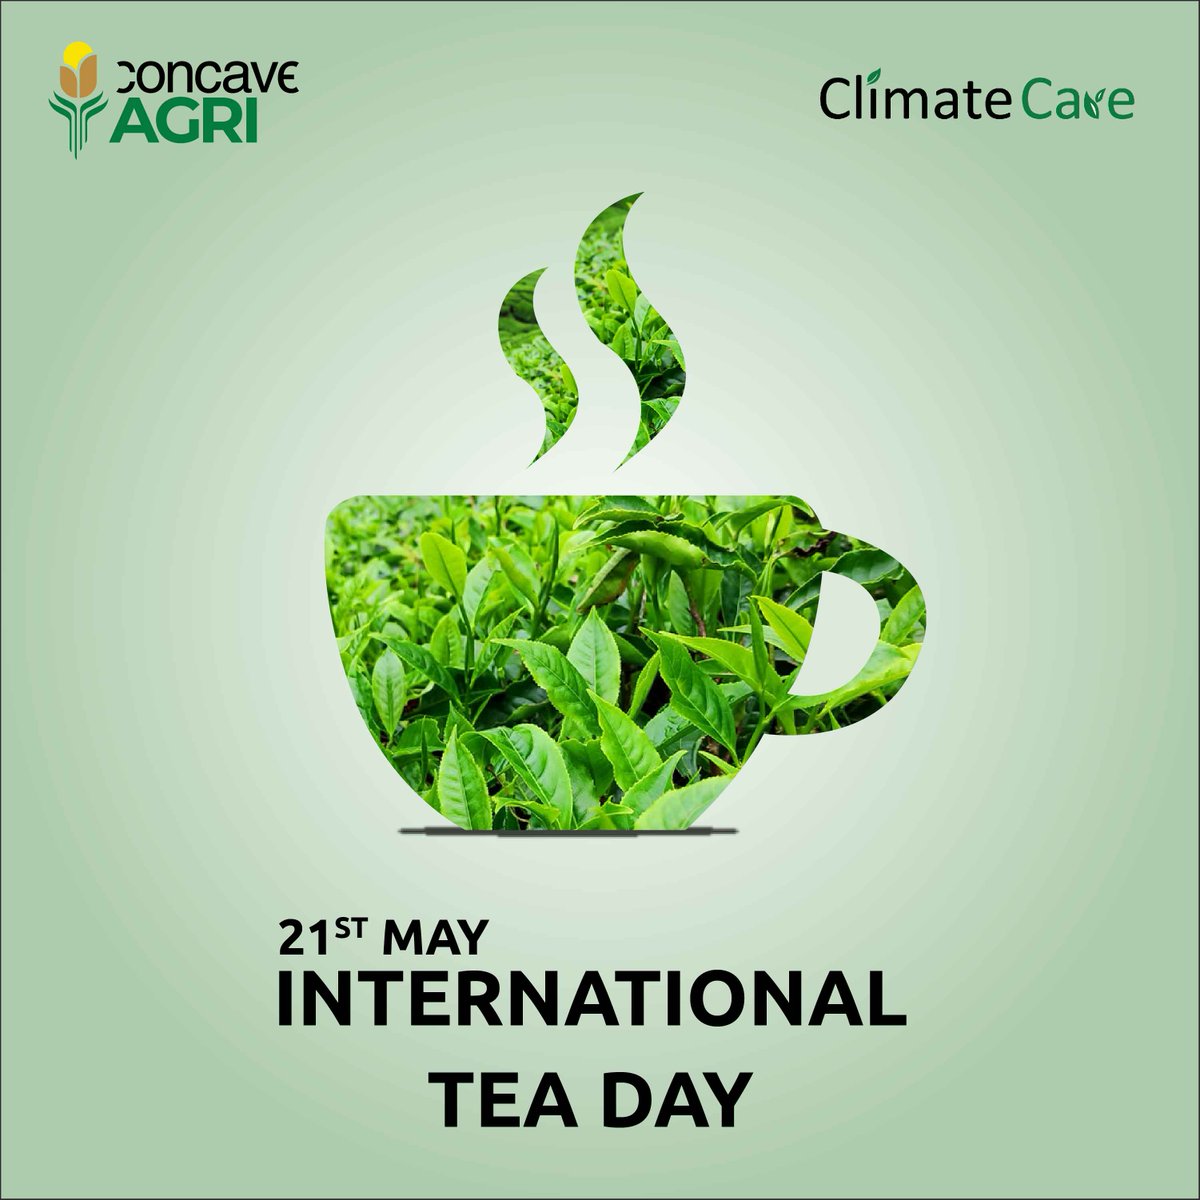 The essence of tea lies in the hands of farmers who pluck, process, and brew it with love. Wishing all the tea-farming communities a Happy International Tea Day! 🍃🍵 
#FarmersTeaEssence #InternationalTeaDay #TeaDay #TeaLoversUnite #TeaTime #TeaAppreciation #FarmersTea